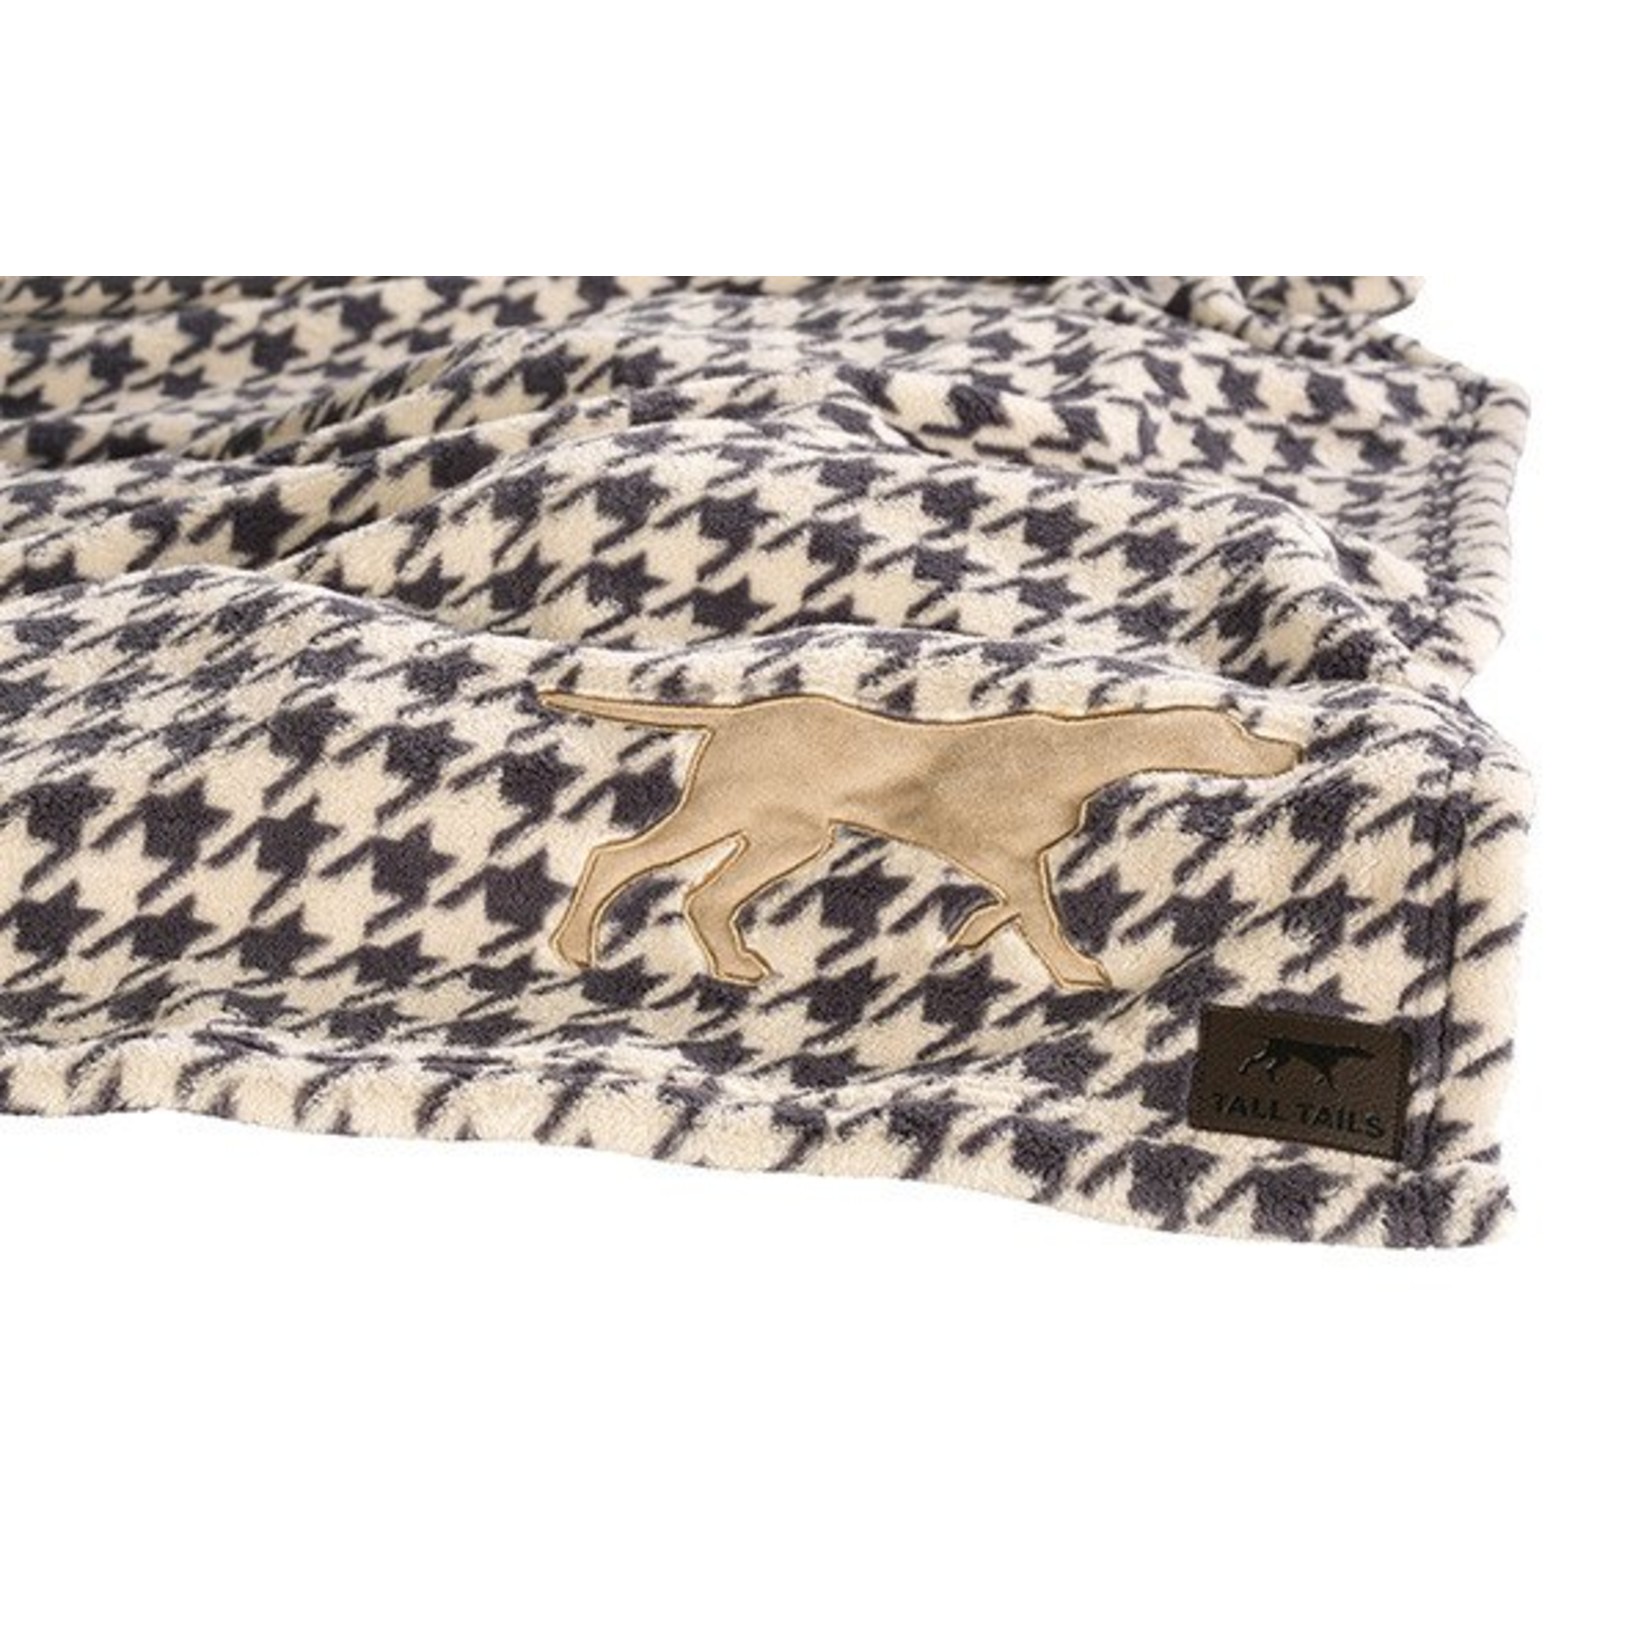 Rosewood Tall Tails Houndstooth Fleece Pet Blanket